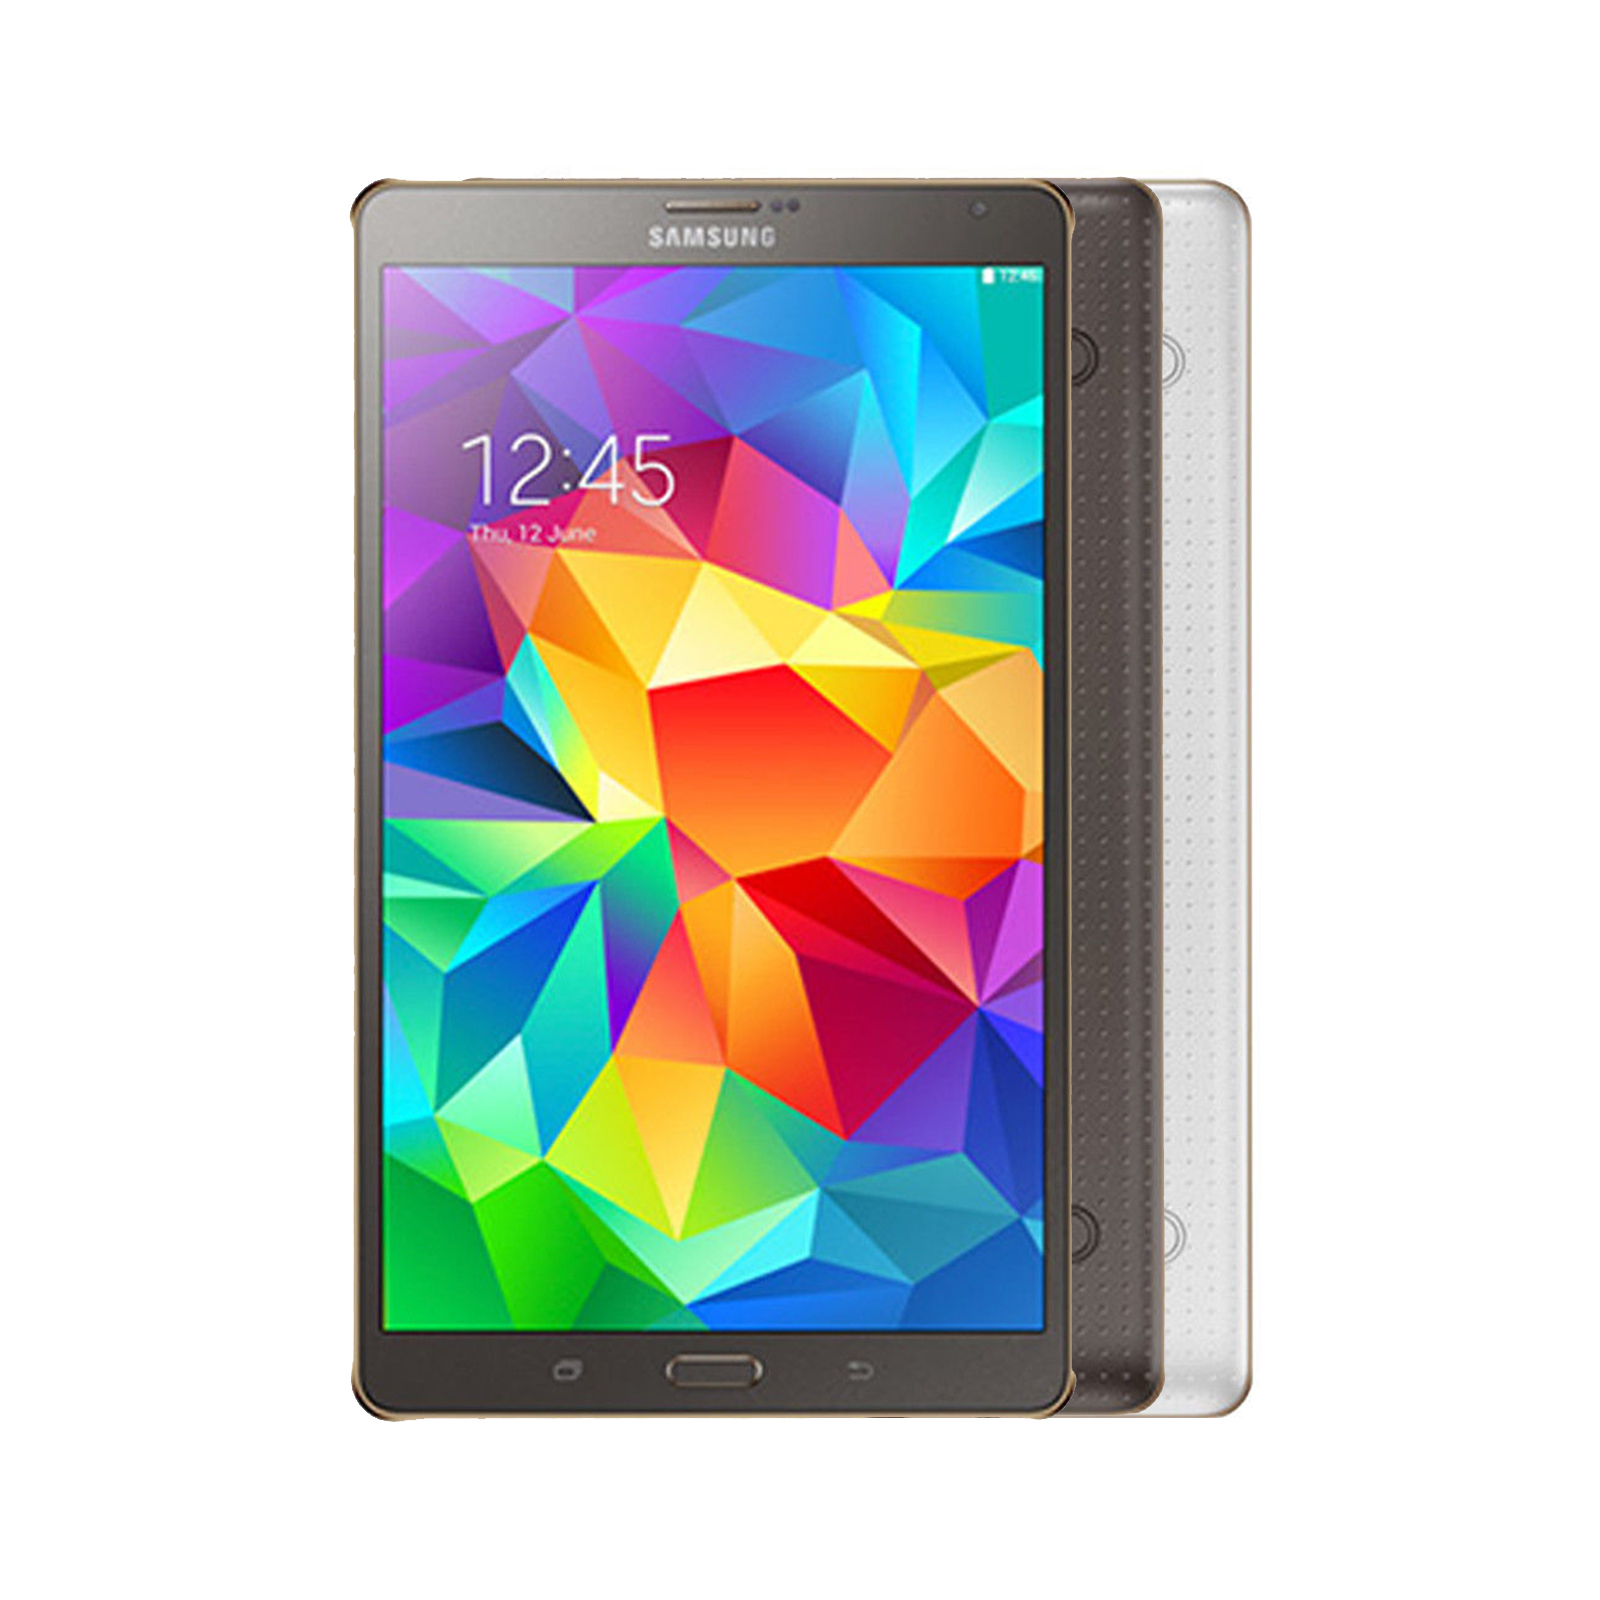 Samsung Galaxy Tab S 8.4 T700 - Excellent Condition